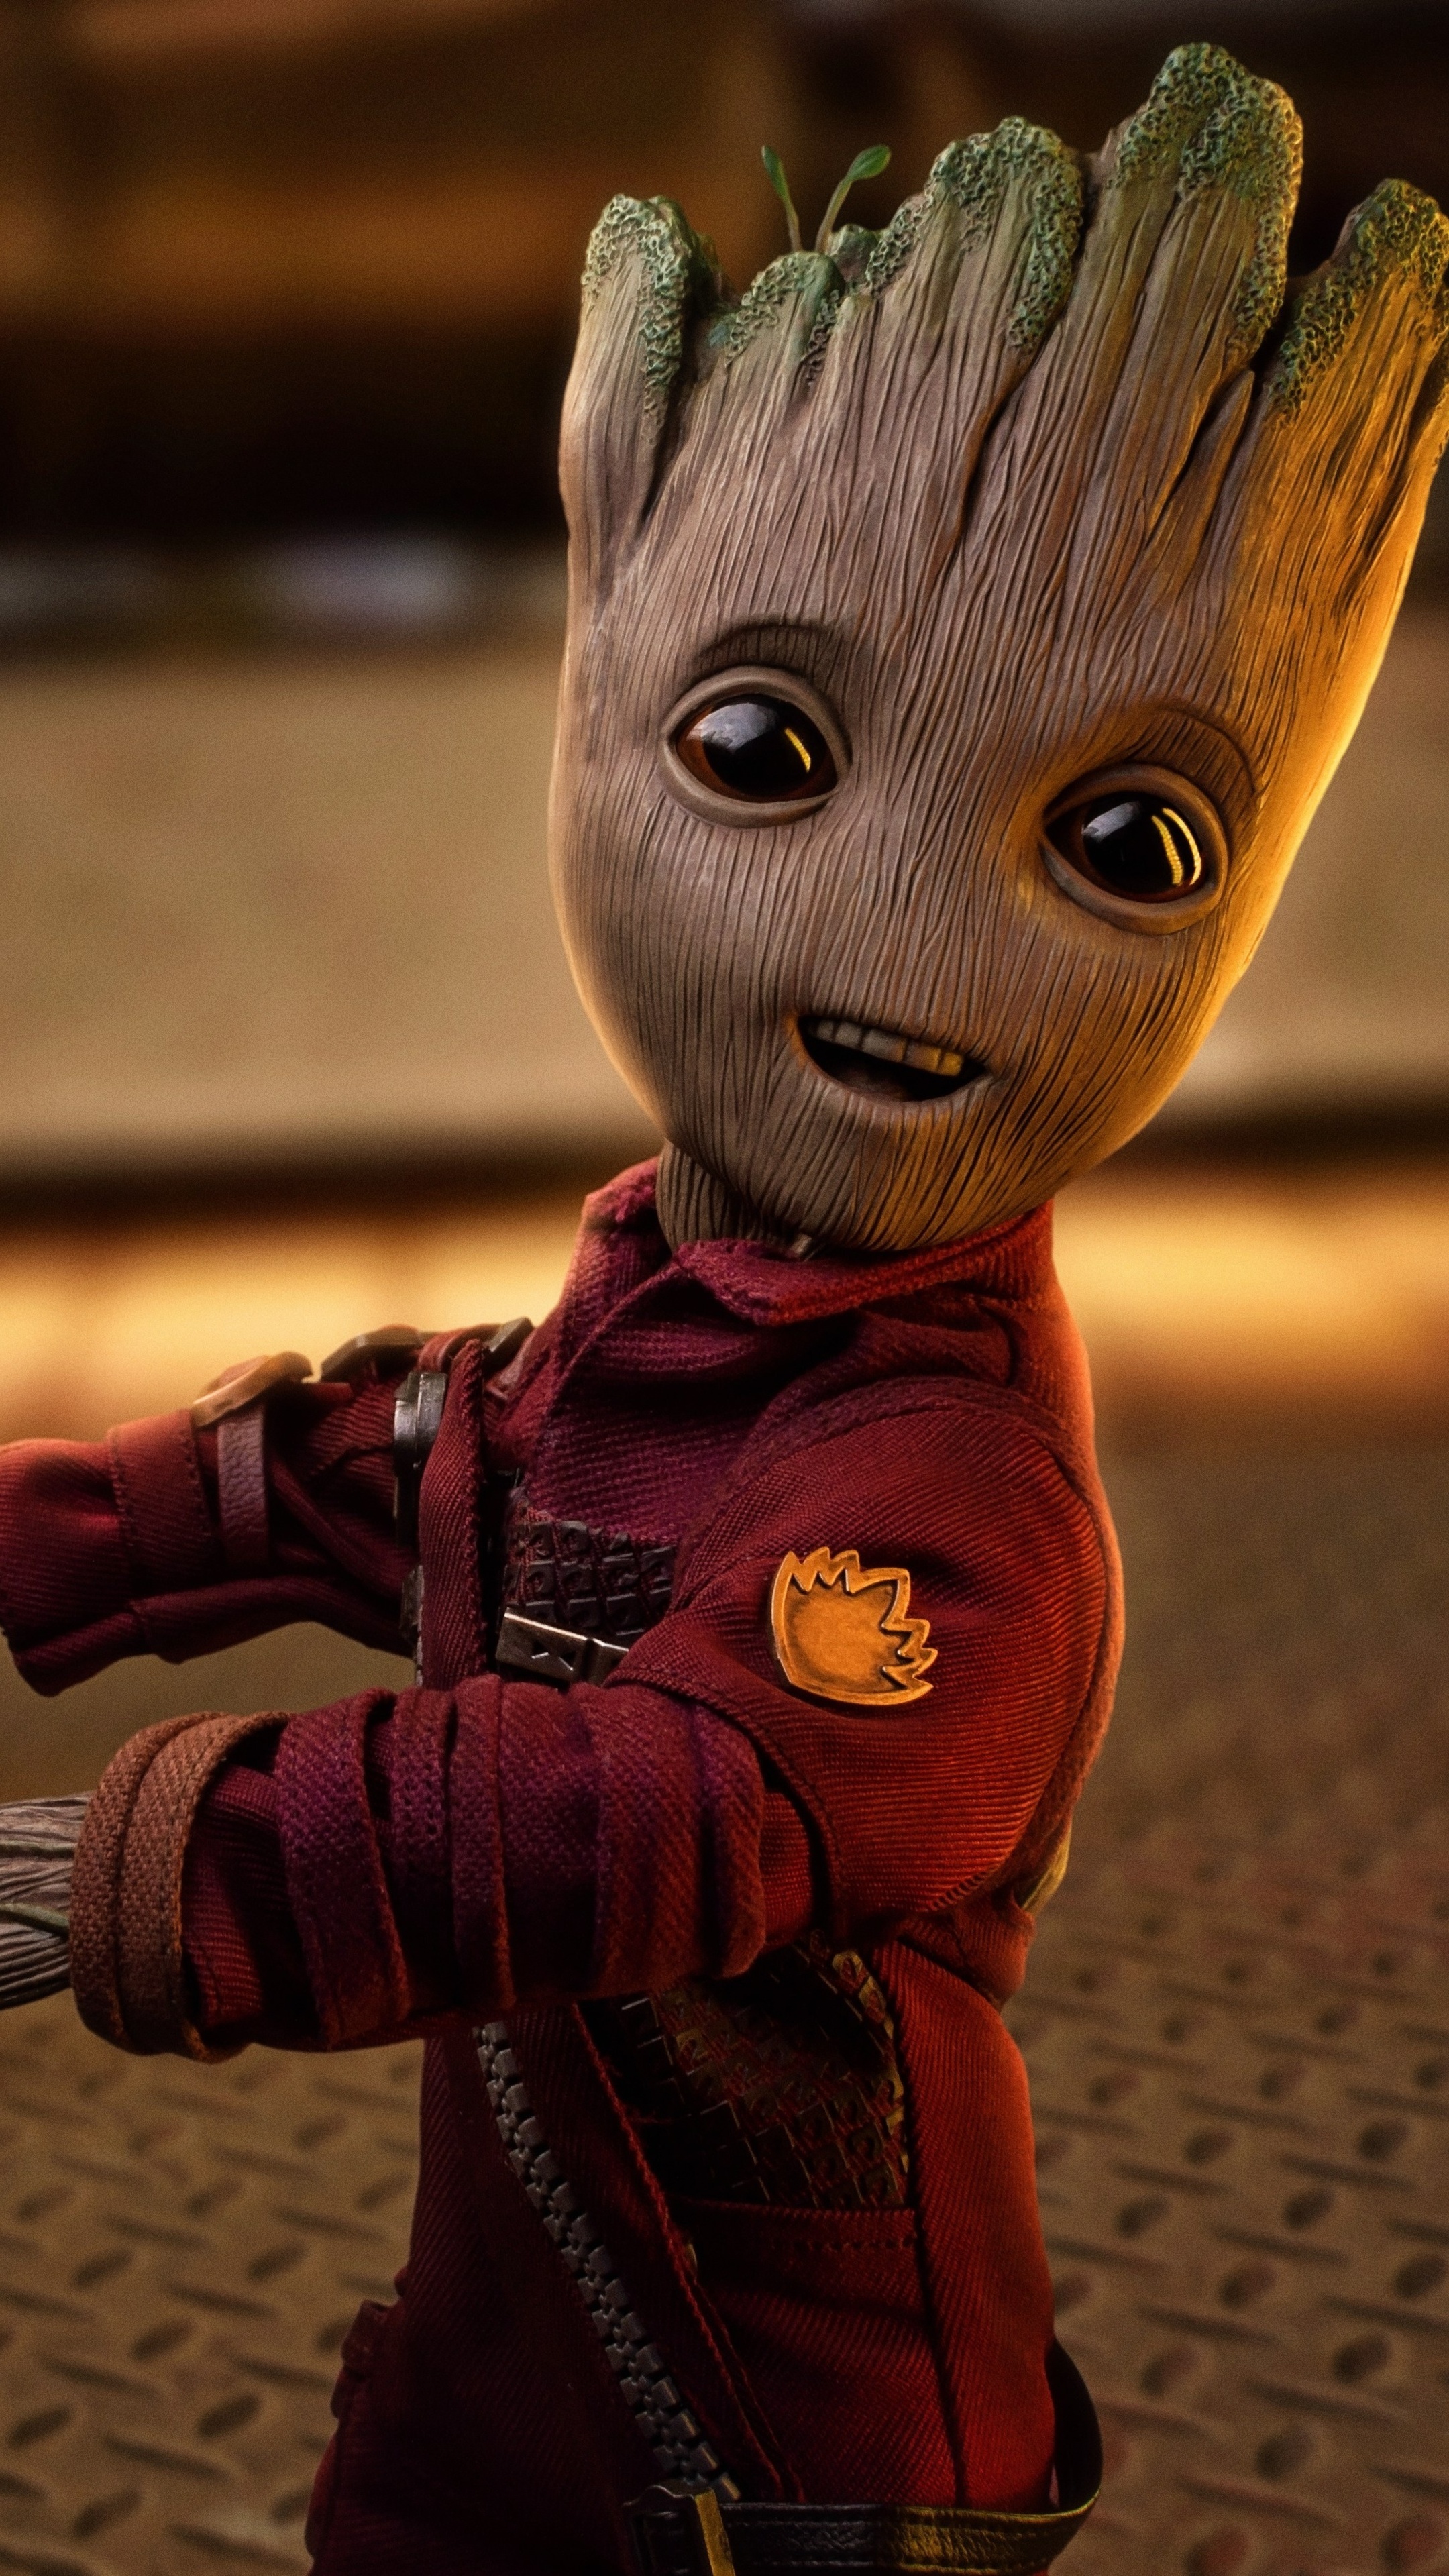 Baby Groot, 5K resolution, Artwork, Sony Xperia, Amazing wallpapers, 2160x3840 4K Phone